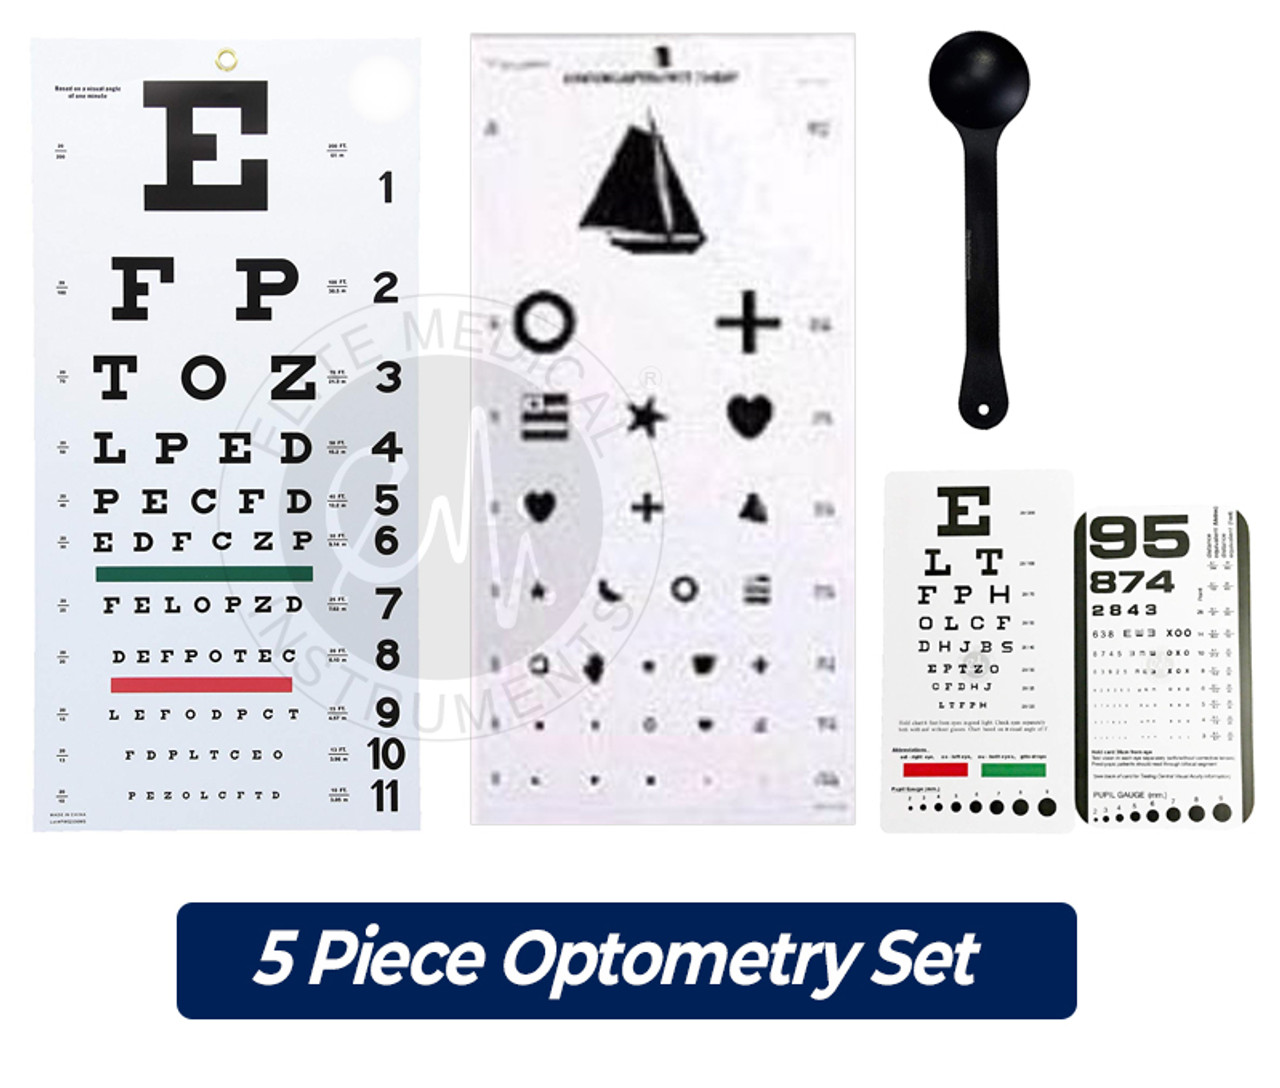 https://cdn11.bigcommerce.com/s-iugkyg/images/stencil/1280x1280/products/229/771/5_piece_optometry_set__35512.1566660771.jpg?c=2